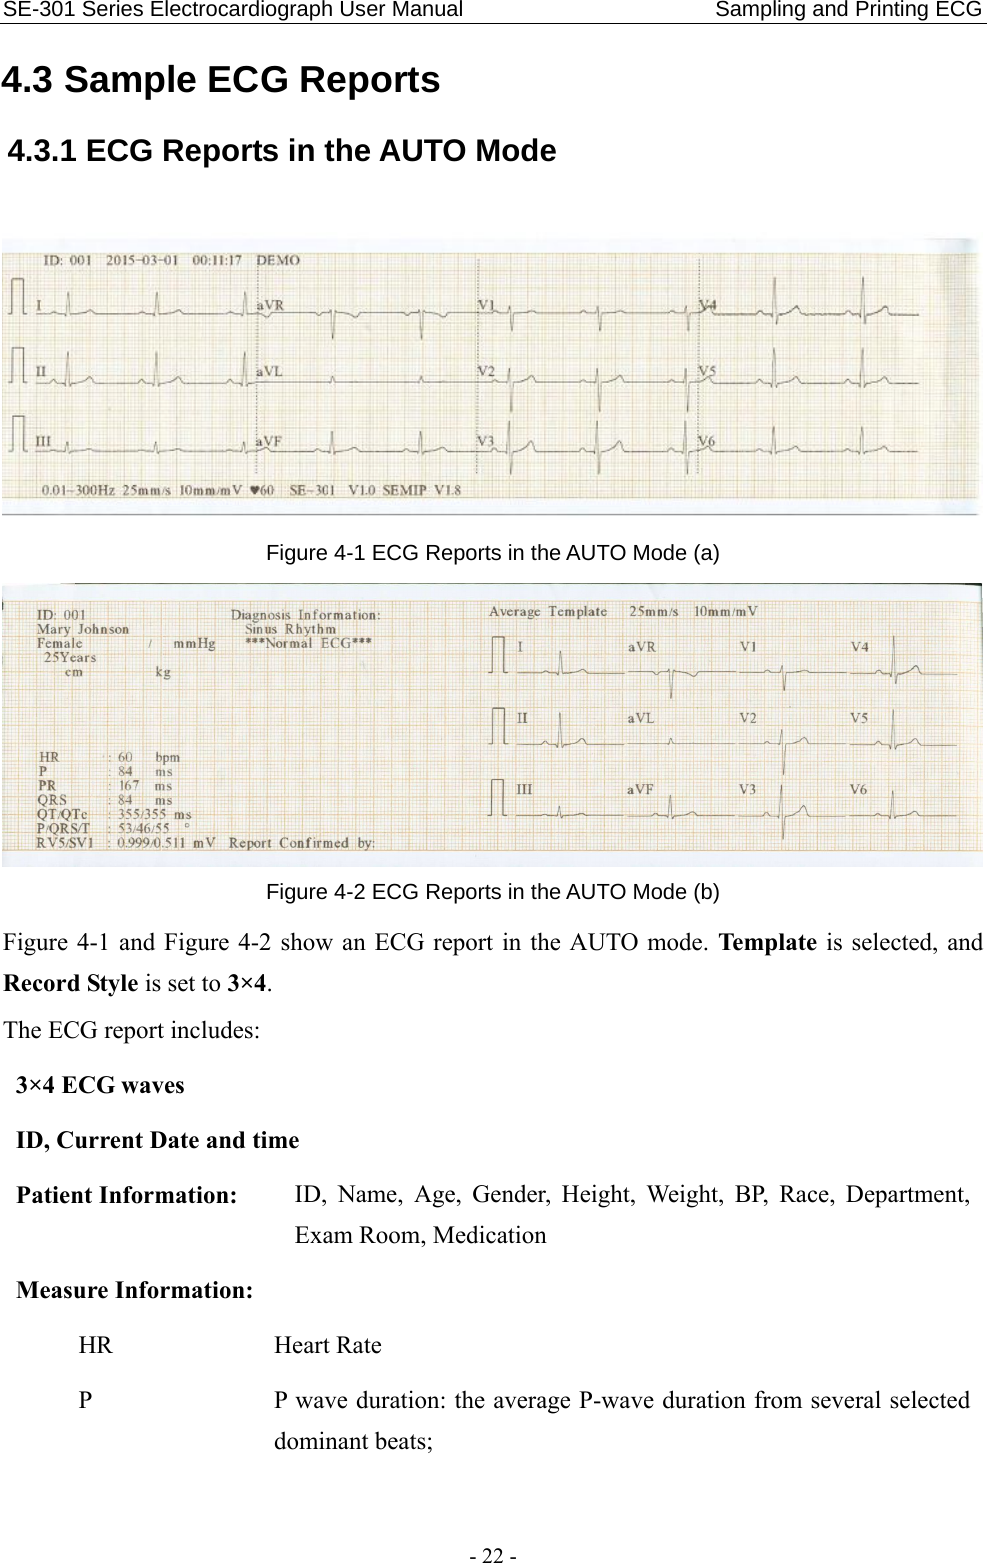 SE-301 Series Electrocardiograph User Manual                       Sampling and Printing ECG - 22 - 4.3 Sample ECG Reports 4.3.1 ECG Reports in the AUTO Mode  Figure 4-1 ECG Reports in the AUTO Mode (a)  Figure 4-2 ECG Reports in the AUTO Mode (b) Figure 4-1 and Figure 4-2 show an ECG report in the AUTO mode. Template is selected, and Record Style is set to 3×4. The ECG report includes:   3×4 ECG waves  ID, Current Date and time Patient Information: ID, Name, Age, Gender, Height, Weight, BP, Race, Department, Exam Room, Medication   Measure Information:   HR Heart Rate P  P wave duration: the average P-wave duration from several selected dominant beats; 